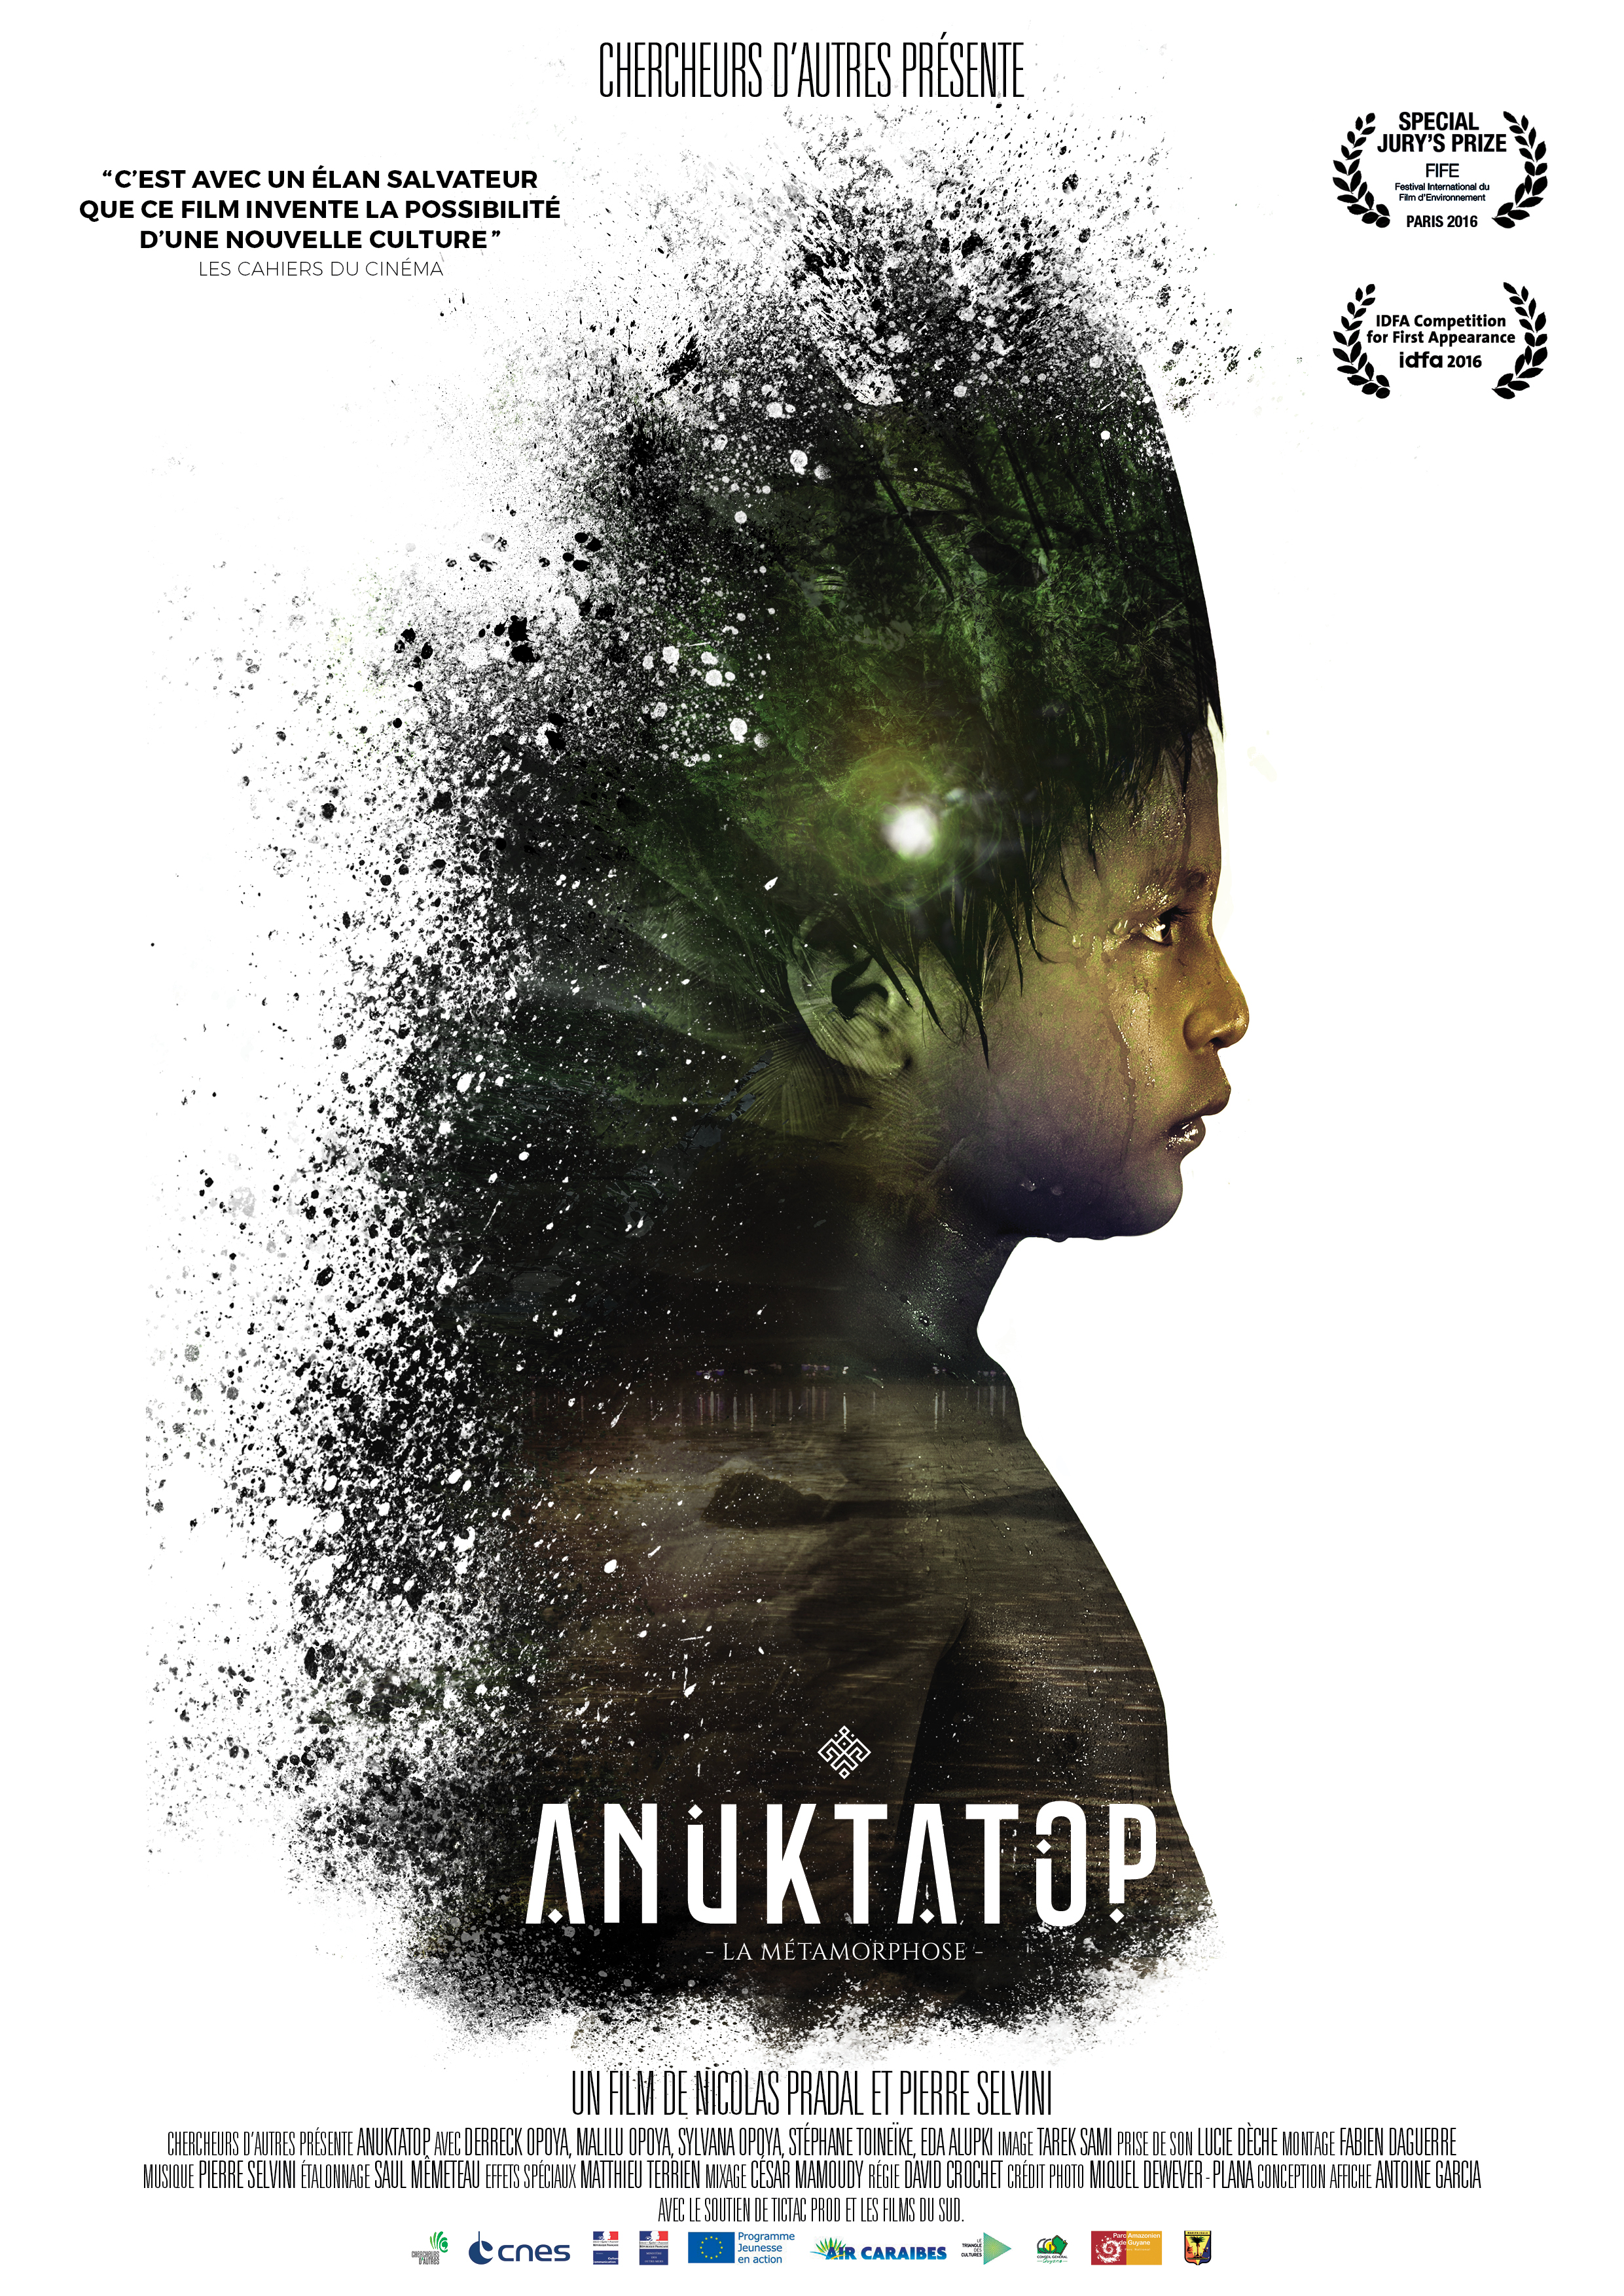 You are currently viewing Commandez le DVD d’Anuktatop!